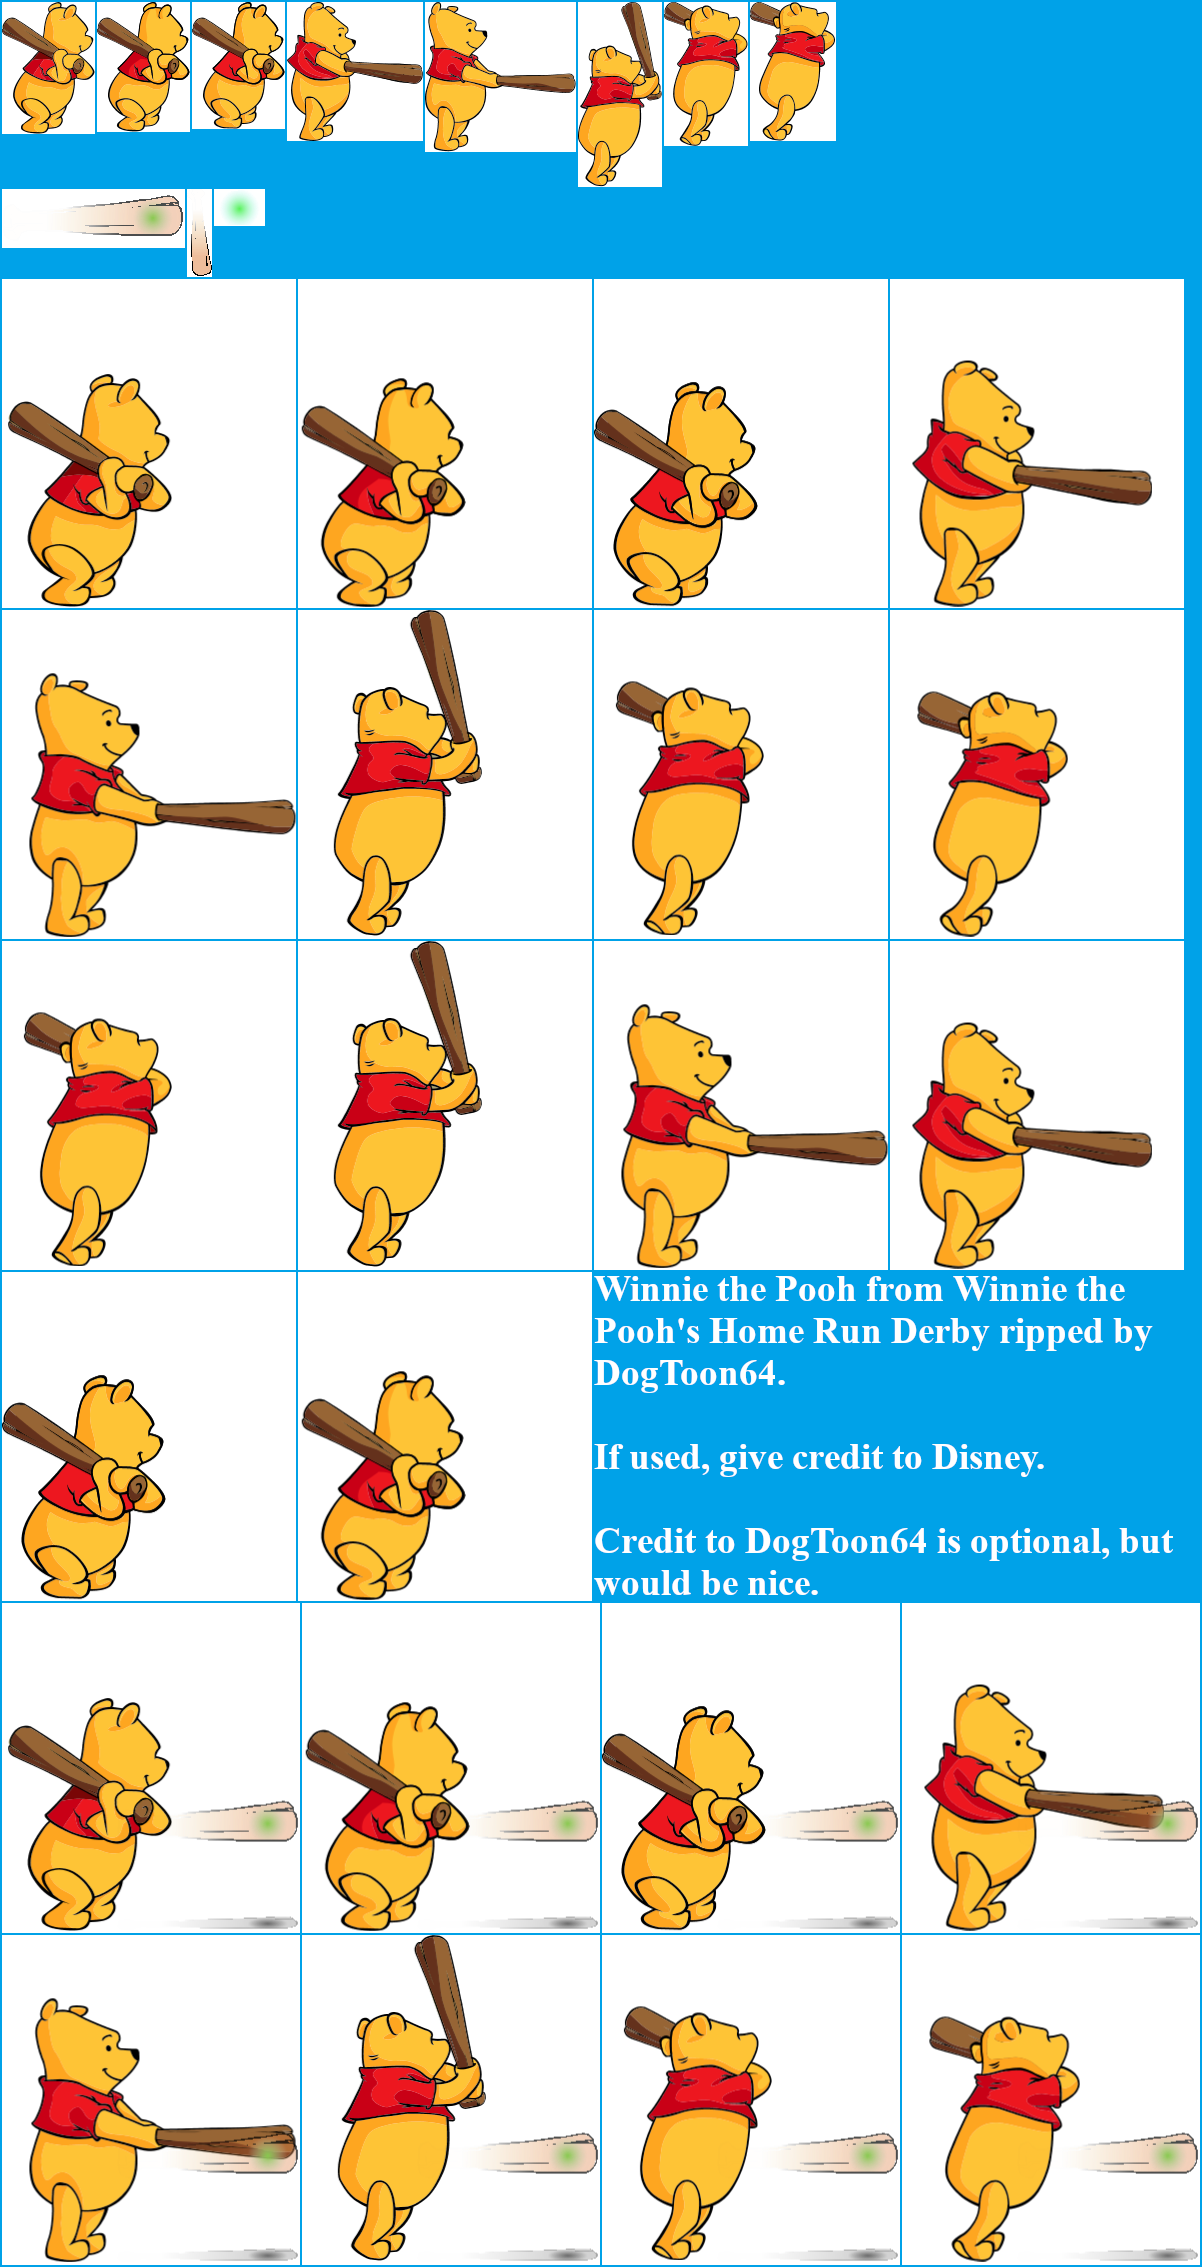 Category:Memes, Pooh's Adventures Wiki